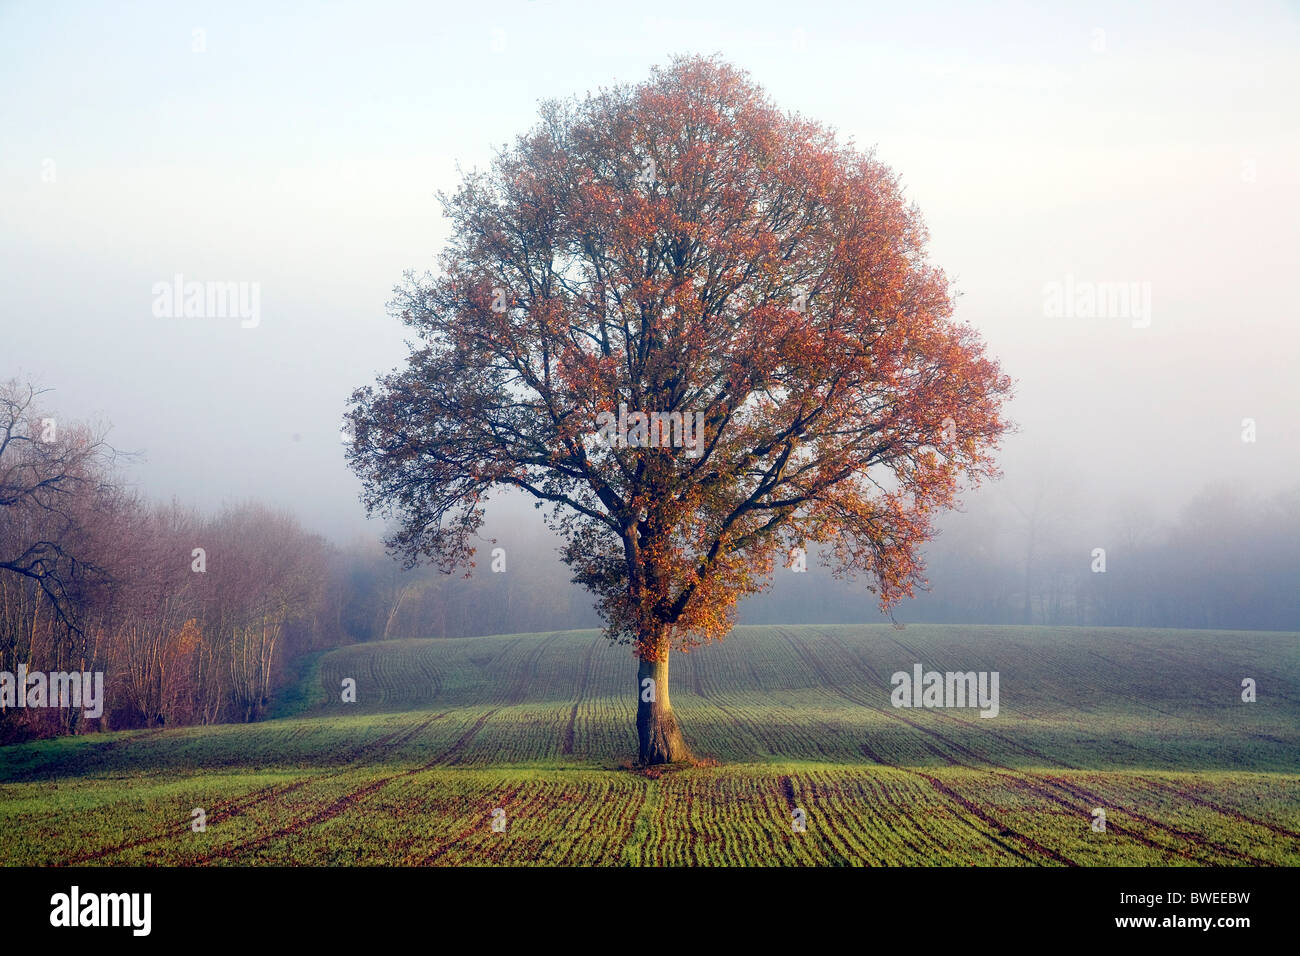 Oak tree in golden autumn coloured leaf on misty morning in newly sewn wheat field in the Weald of Kent UK Stock Photo